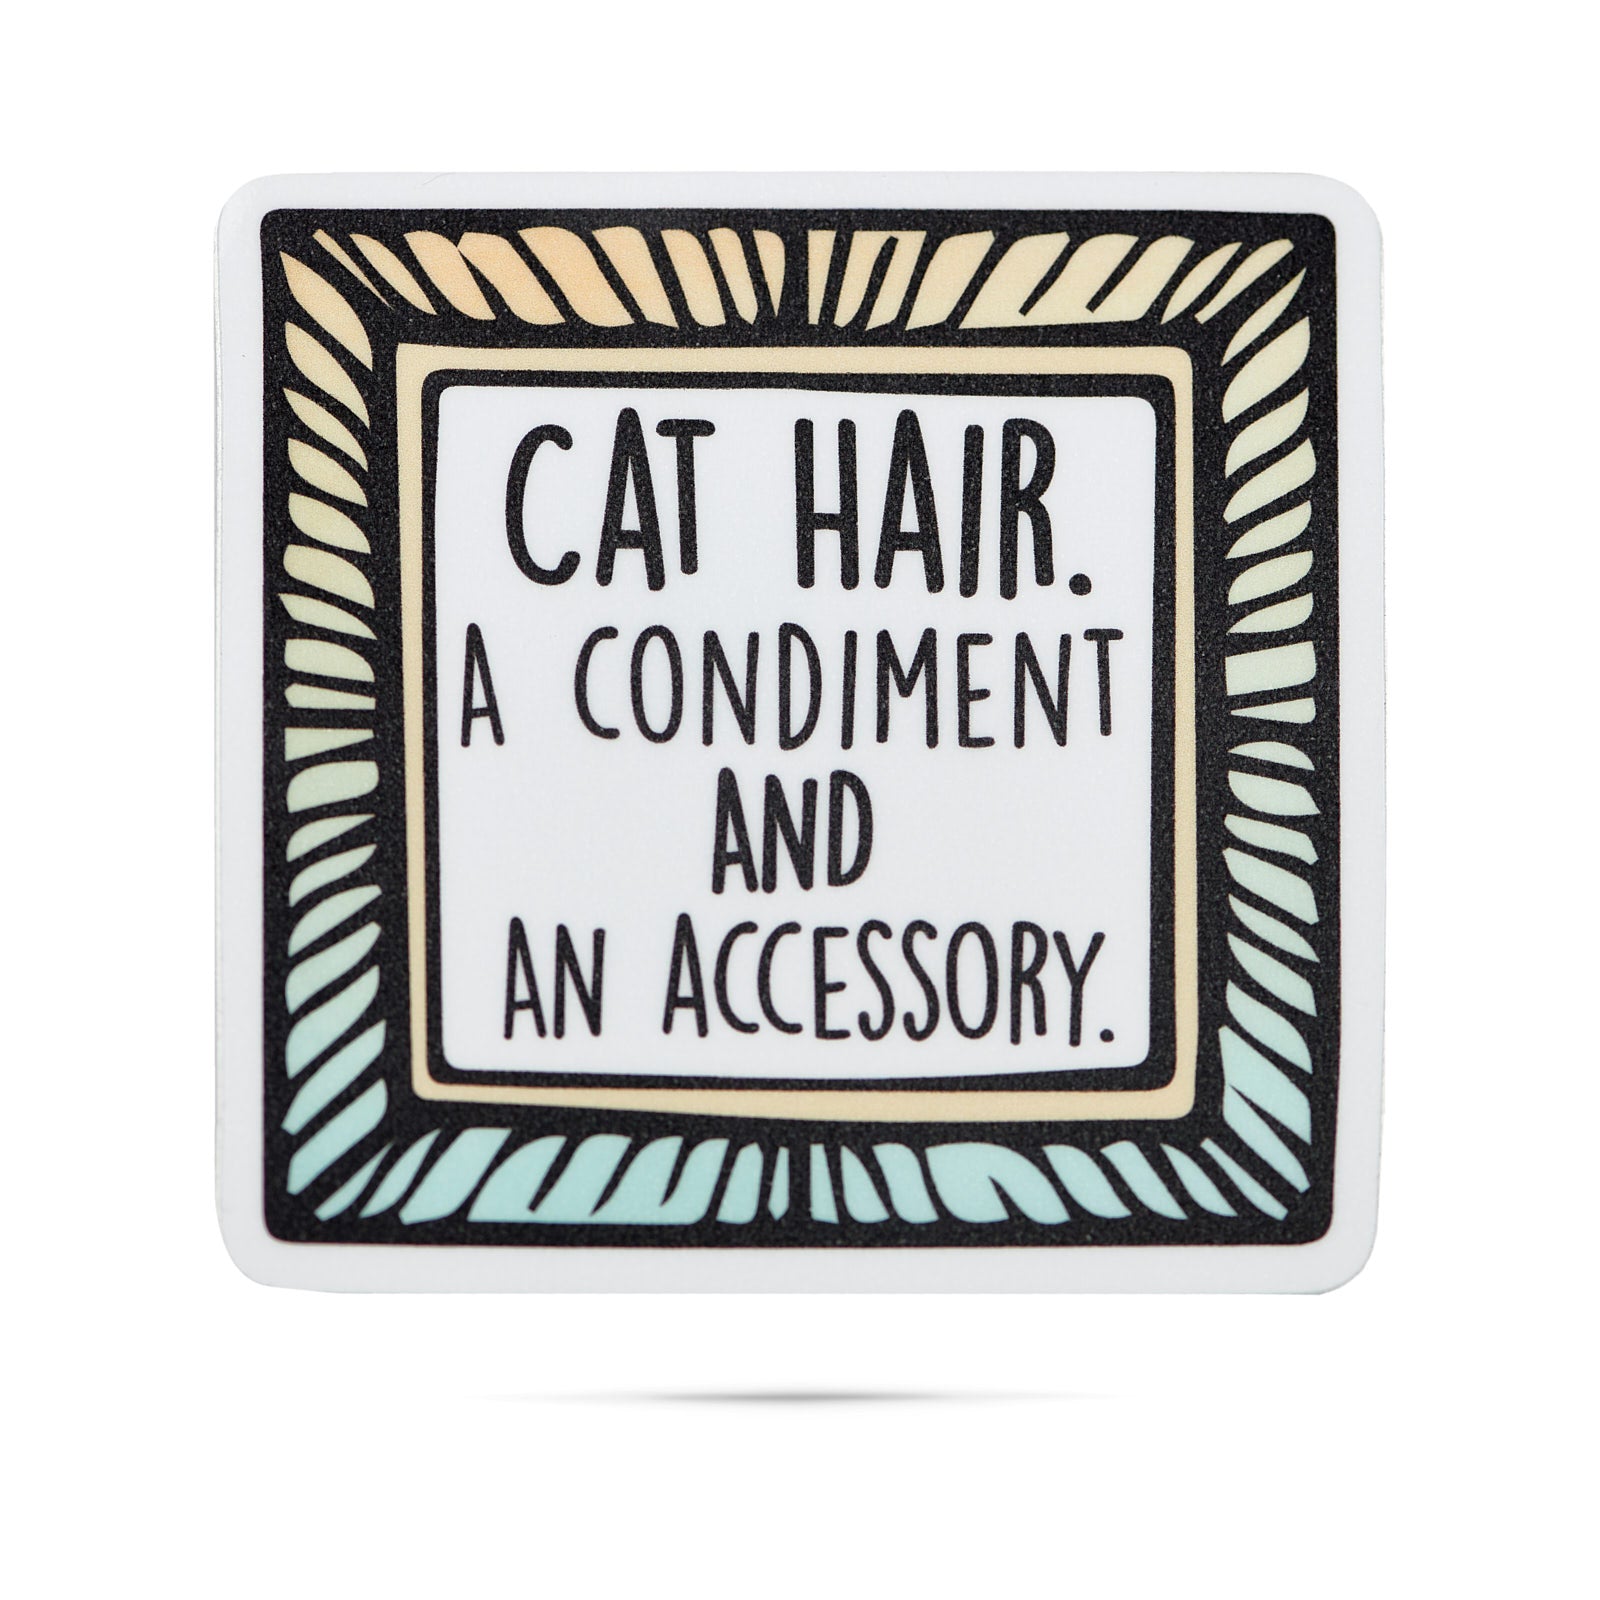 Cat hair a condiment and an accessory vinyl stickers